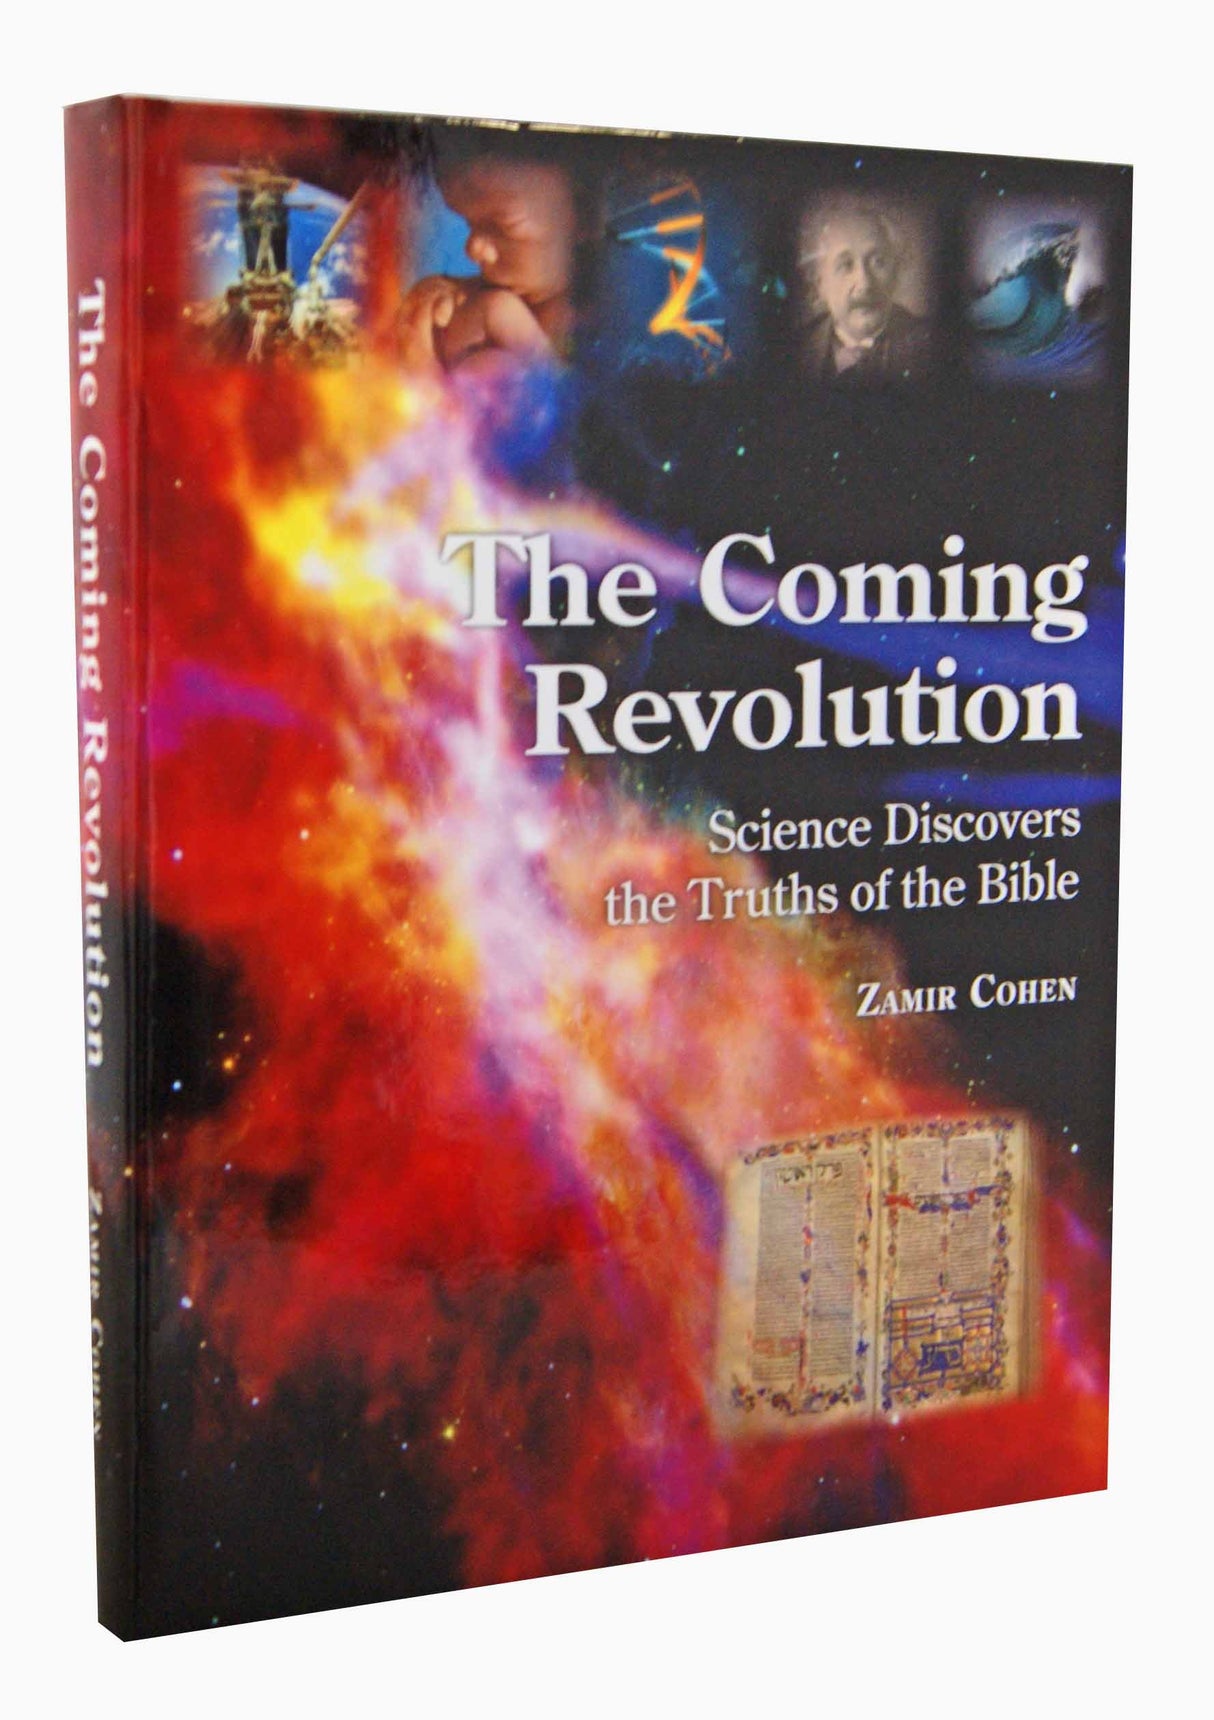 The Coming Revolution - Science Discovers Truths of the Bible